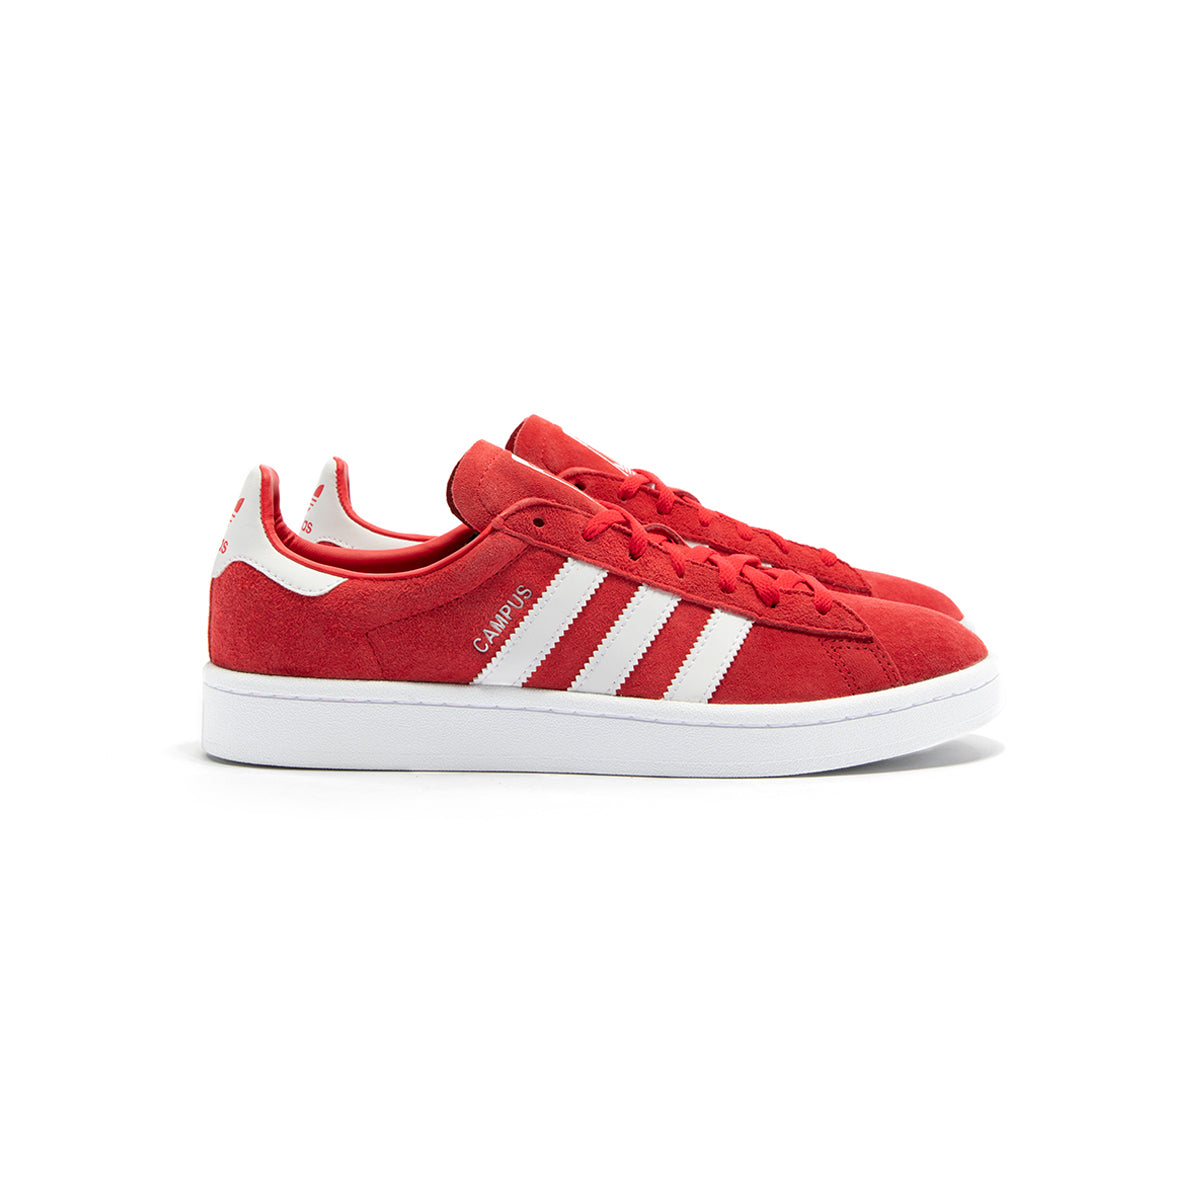 red campus adidas womens